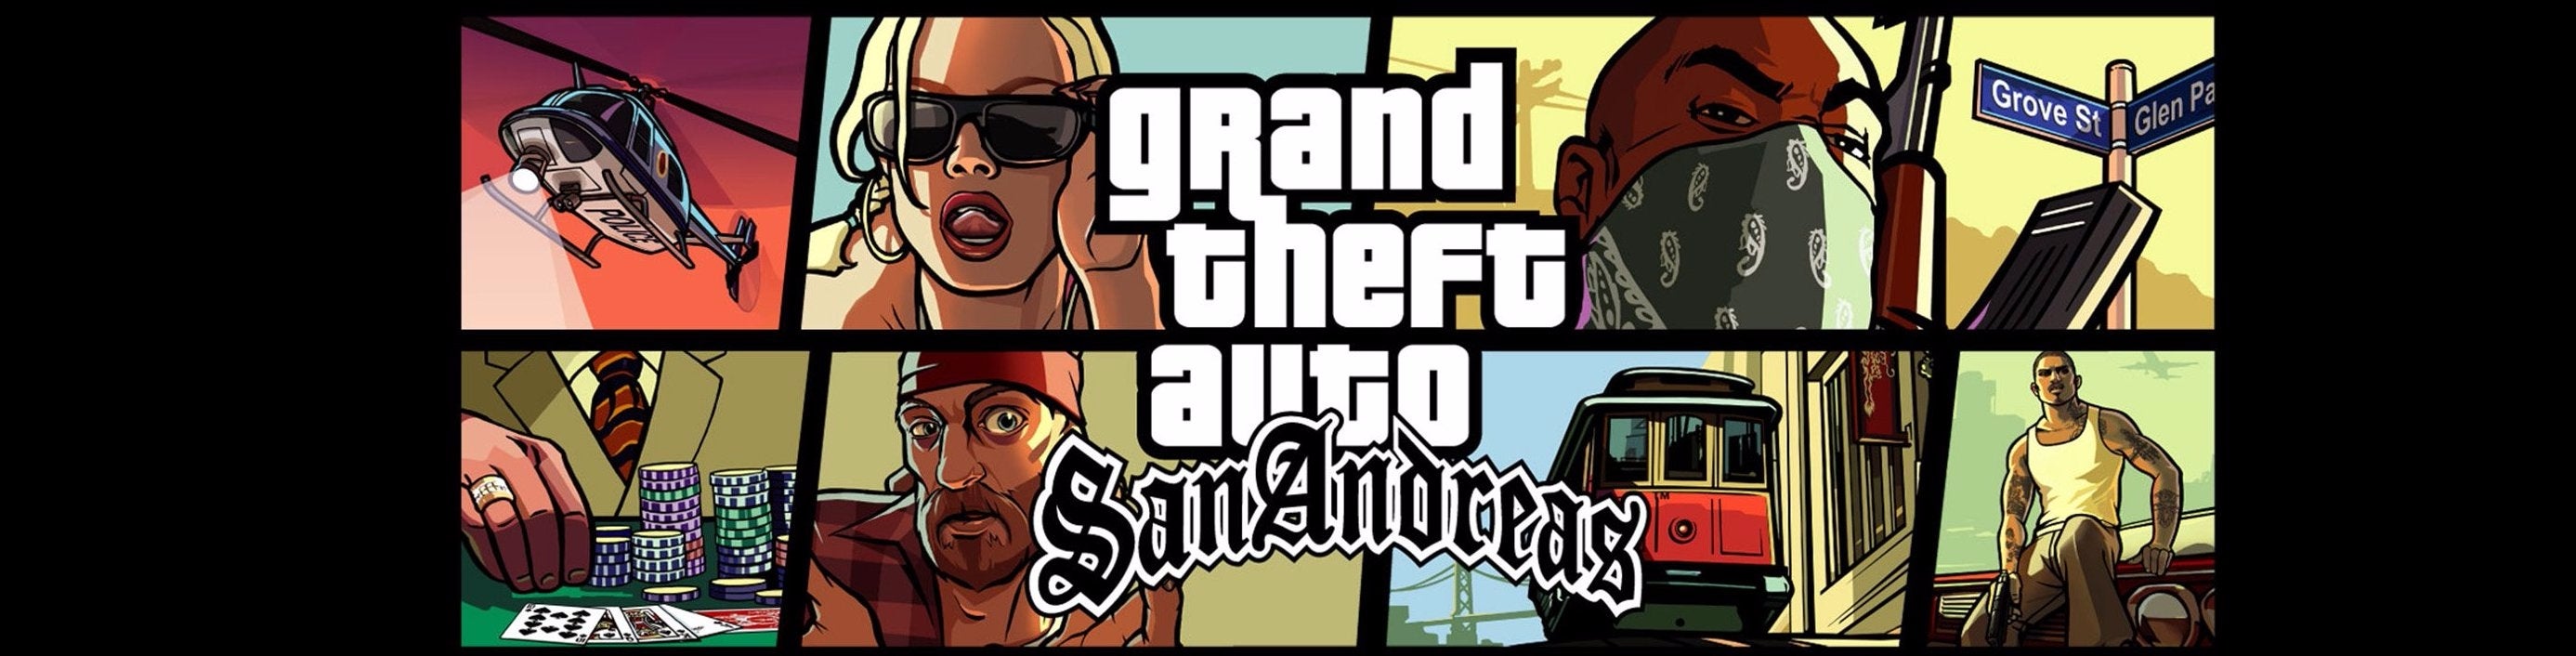 Image for Face-Off: Grand Theft Auto San Andreas